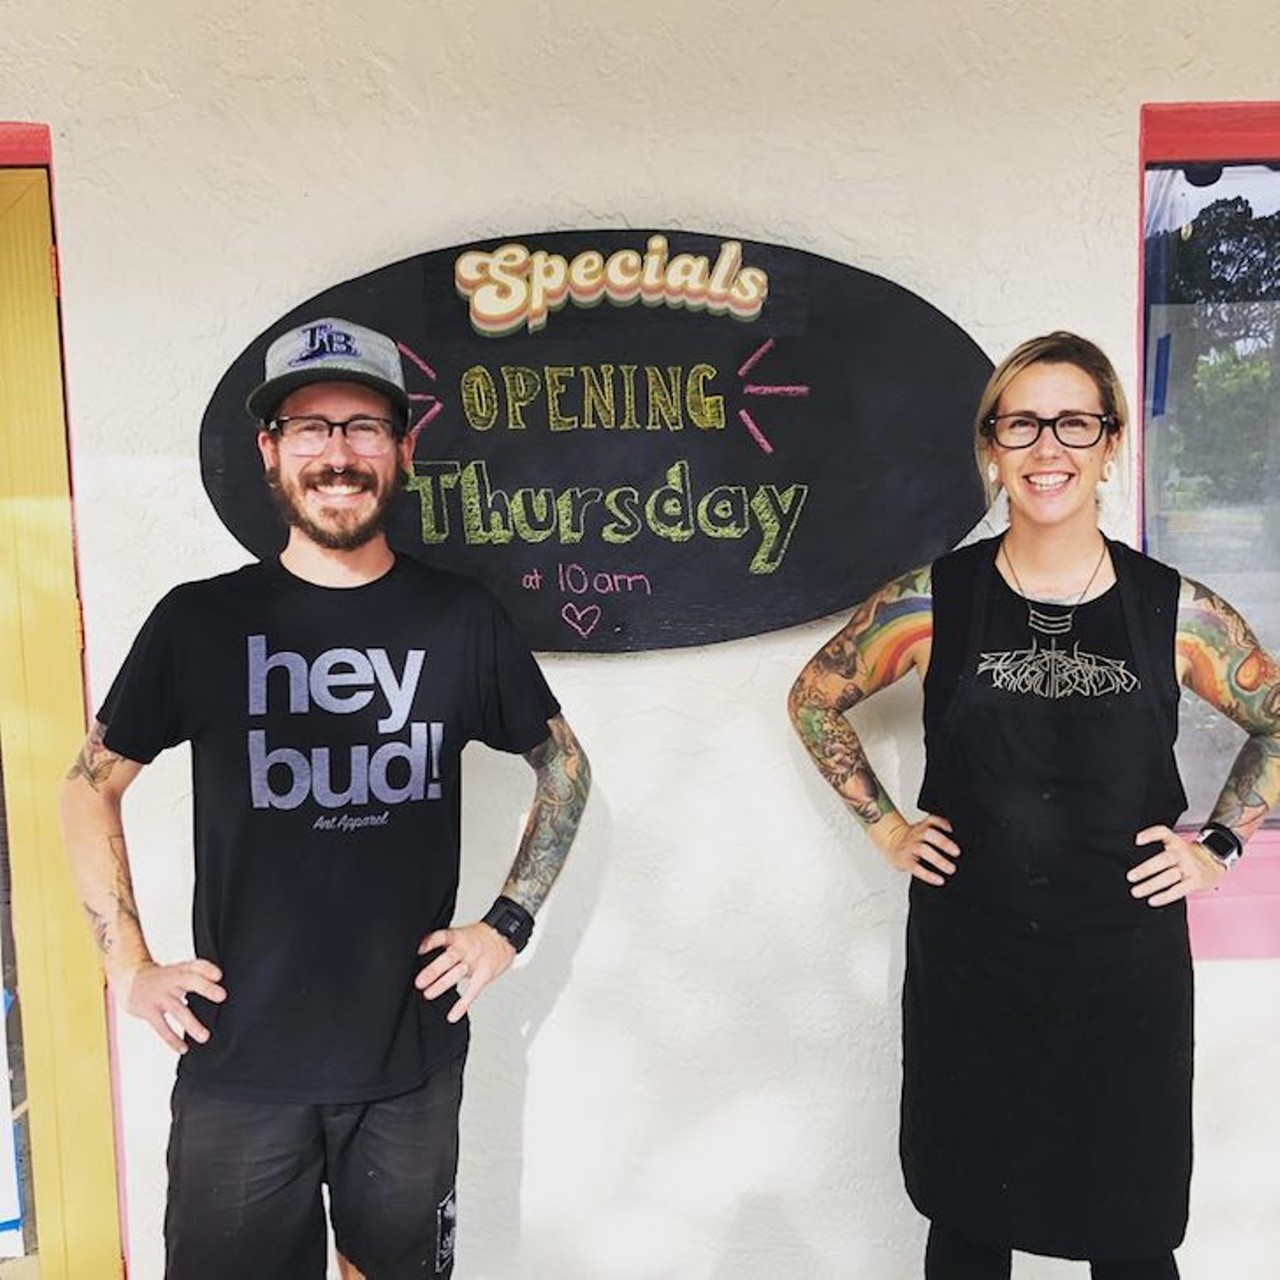 Golden Dinosaurs Vegan Deli  
Audrey Dingeman
2930 Beach Blvd S, Gulfport, 727-873-6901
Audrey Dingeman and husband Brian, launched the vegan deli in August 2018, offering plant-based specialties like their Tempeh Reuben with St. Pete Ferments&#146; kraut, cheese, thousand island dressing on pumpernickel.
Photo via Golden Dinosaurs Vegan Deli/Facebook